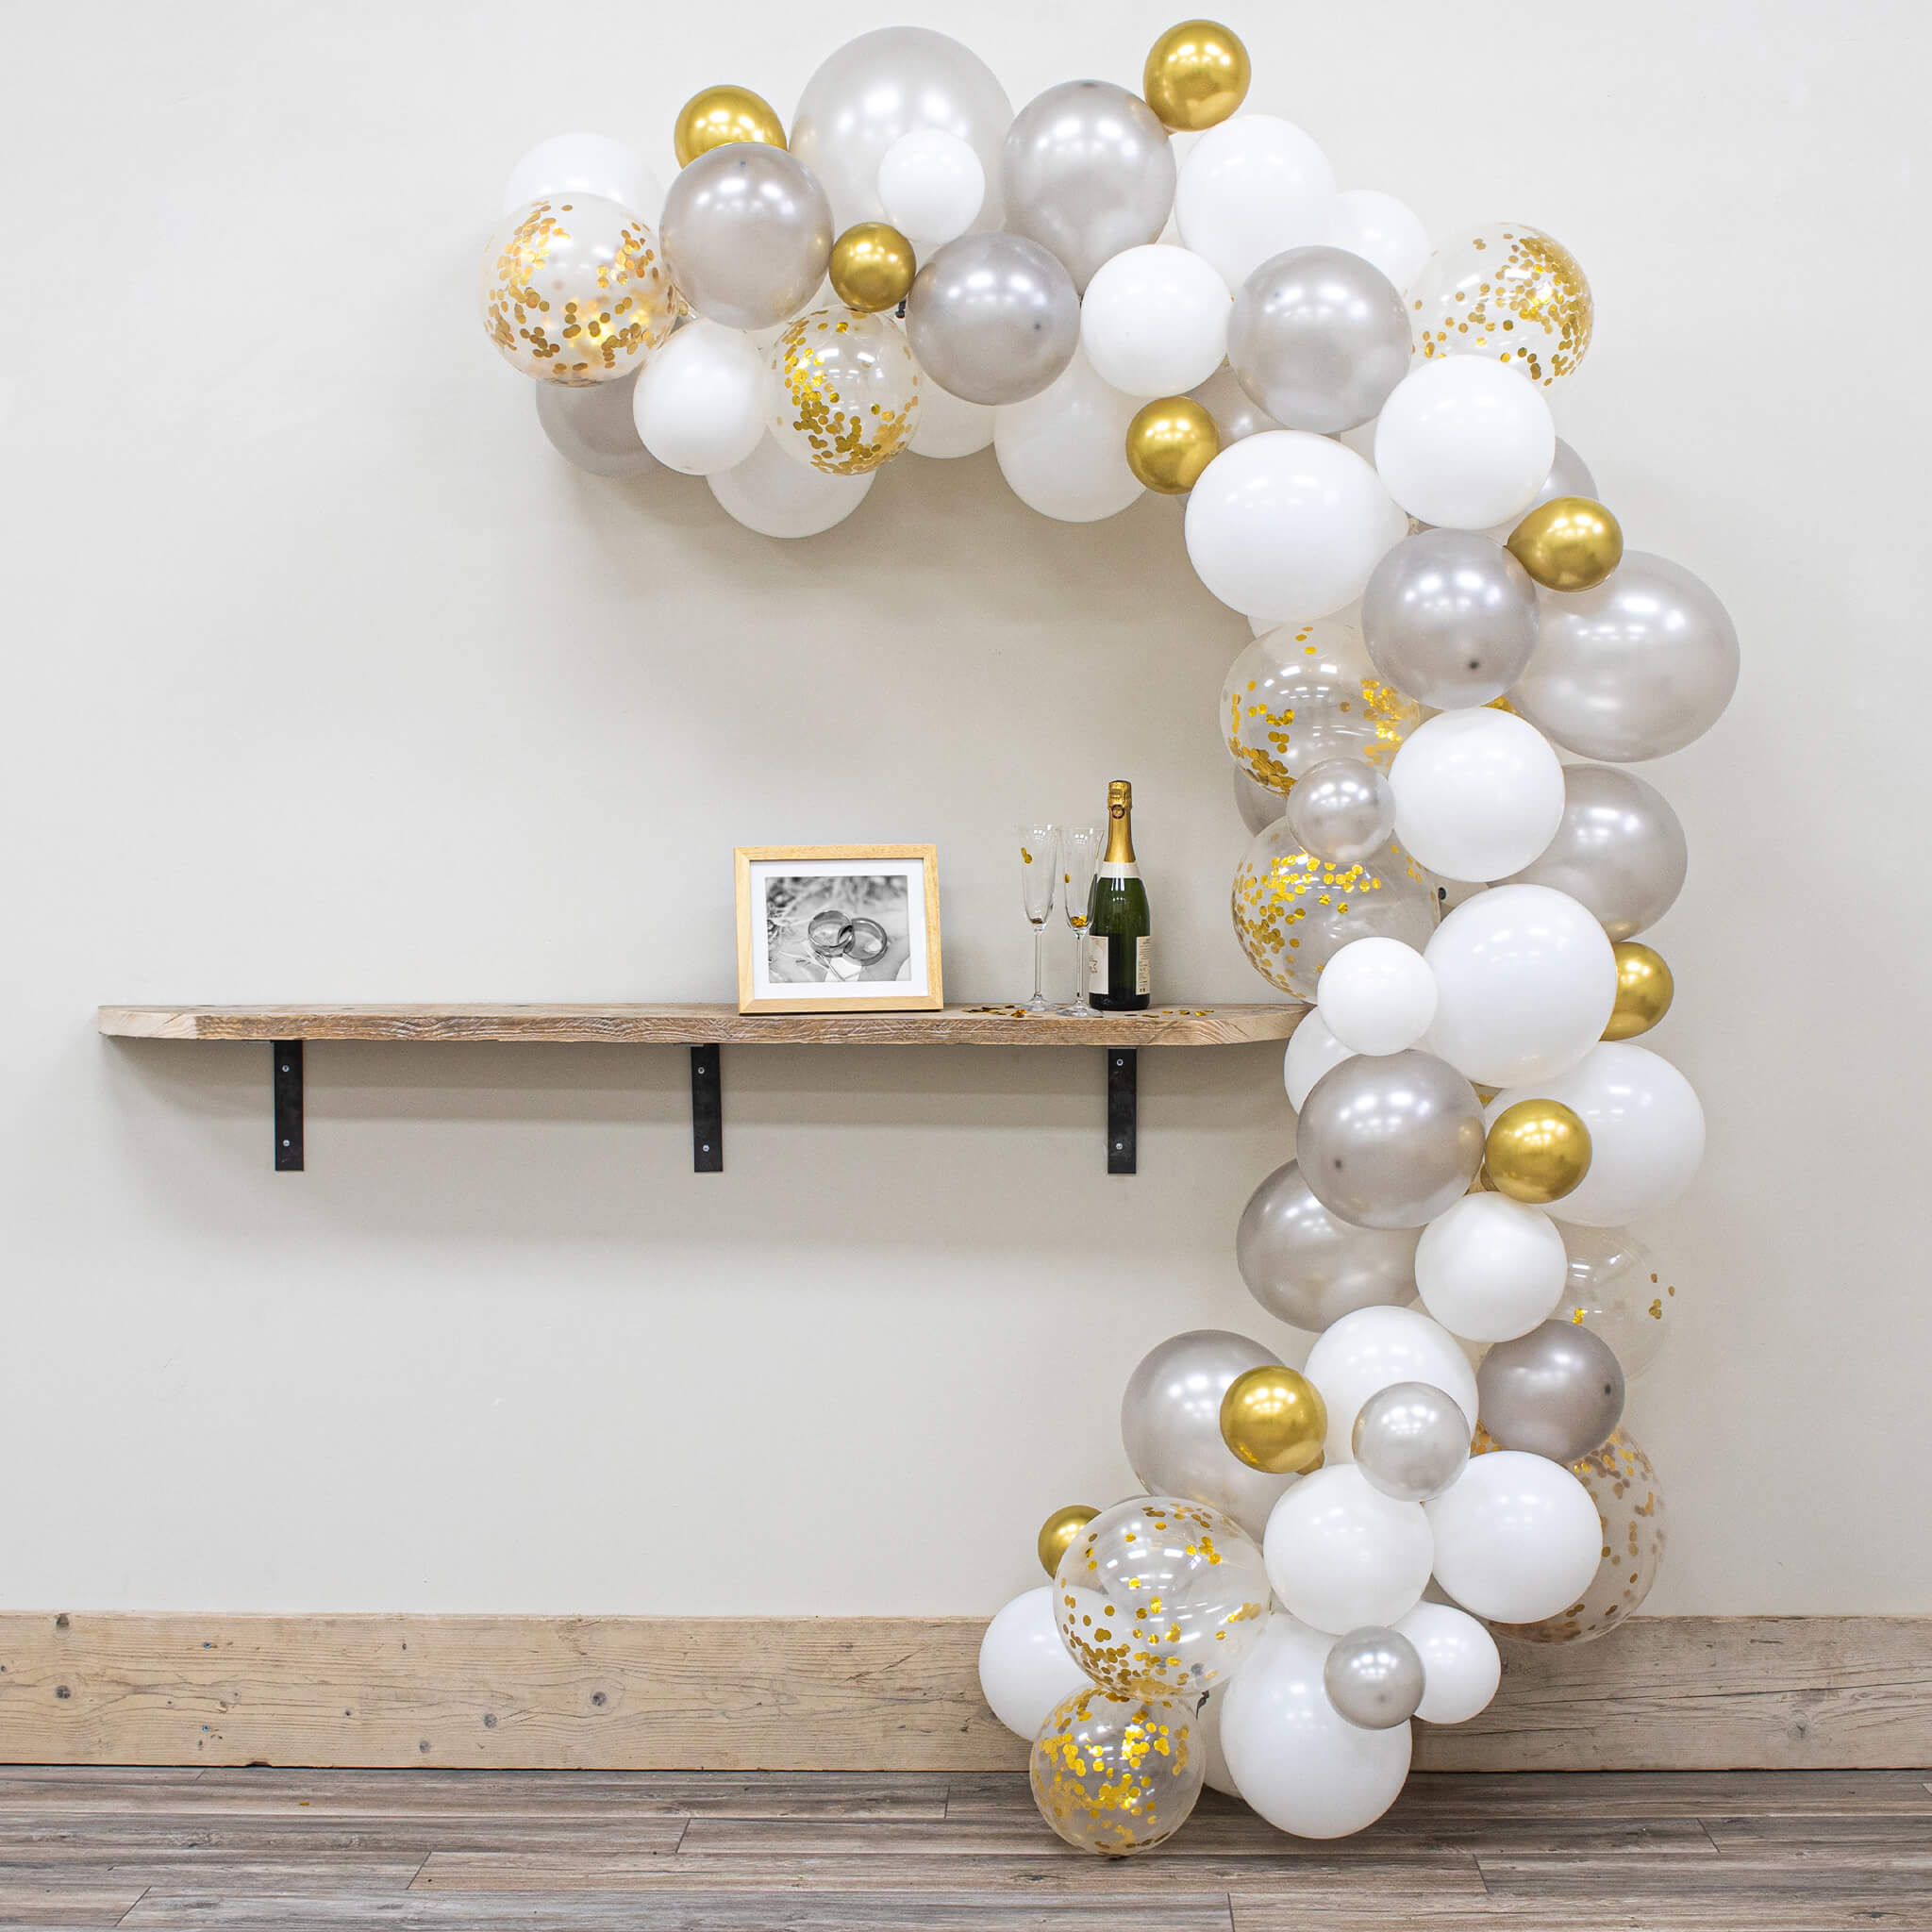 Wedding or Anniversary DIY Balloon Arch Kit - Includes over 120 Balloons